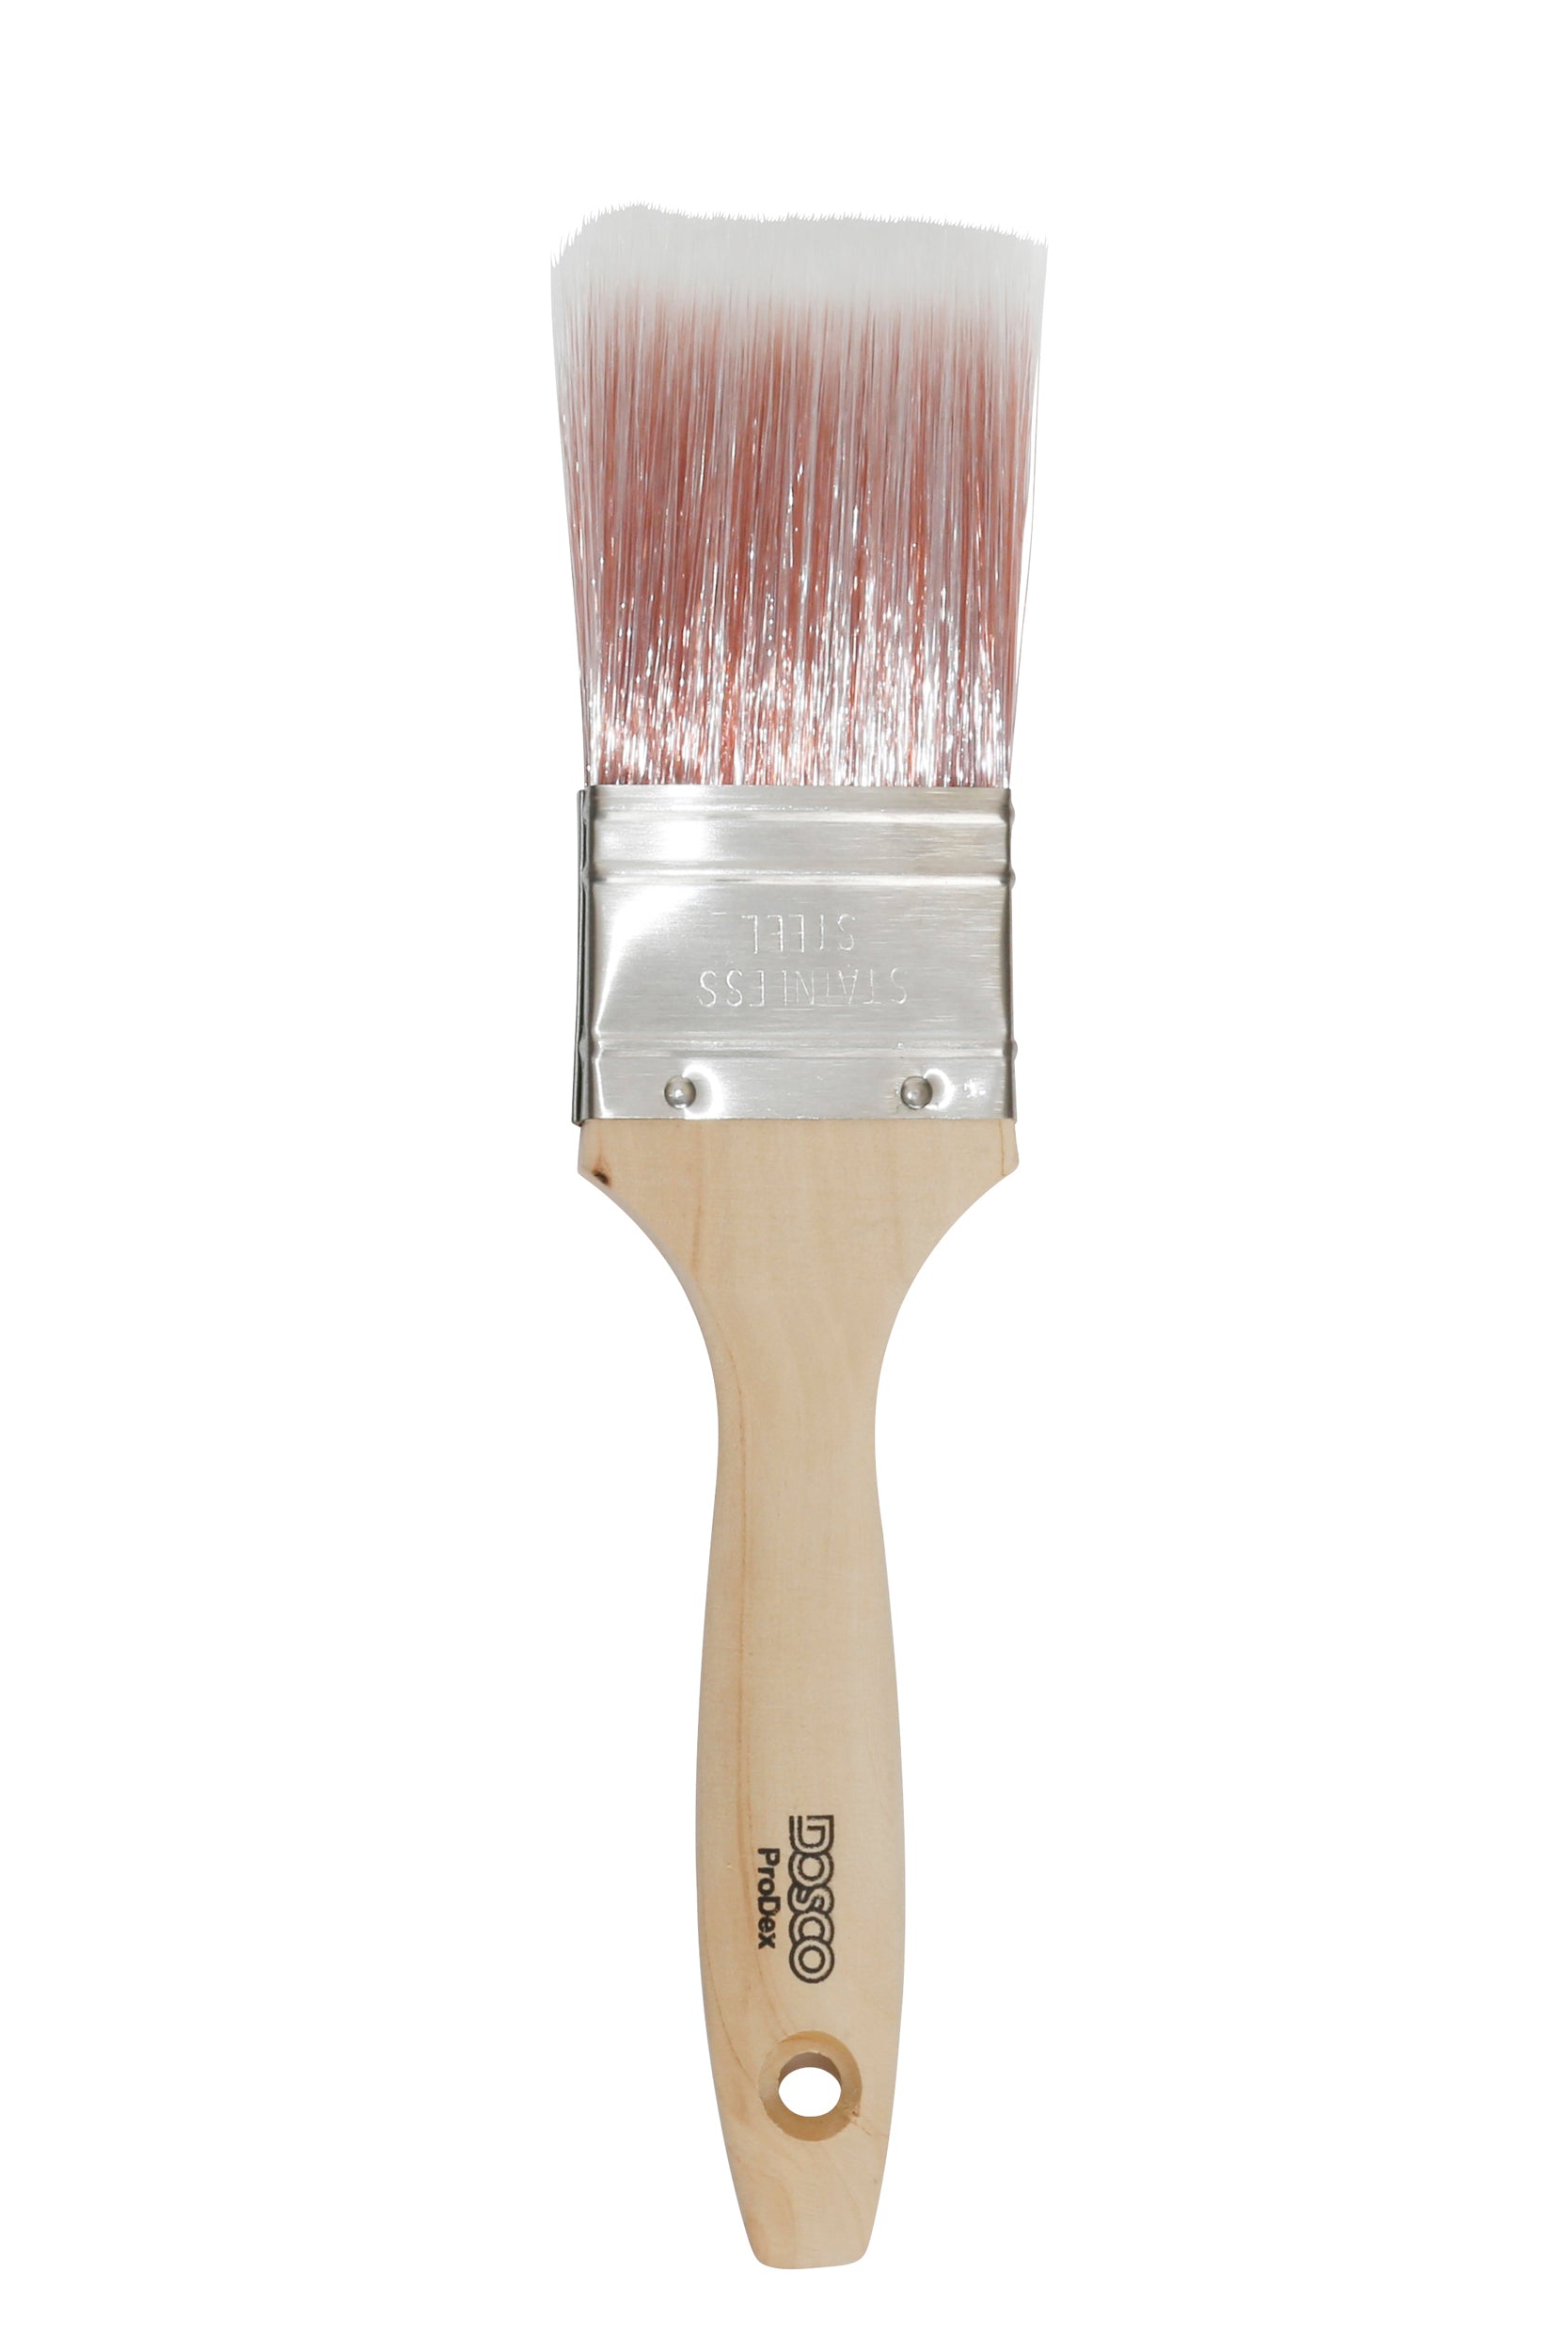 Paint & Decorating | DOSCO Pro-Dex Synthetic Paint Brush 2.5 inch by Weirs of Baggot St